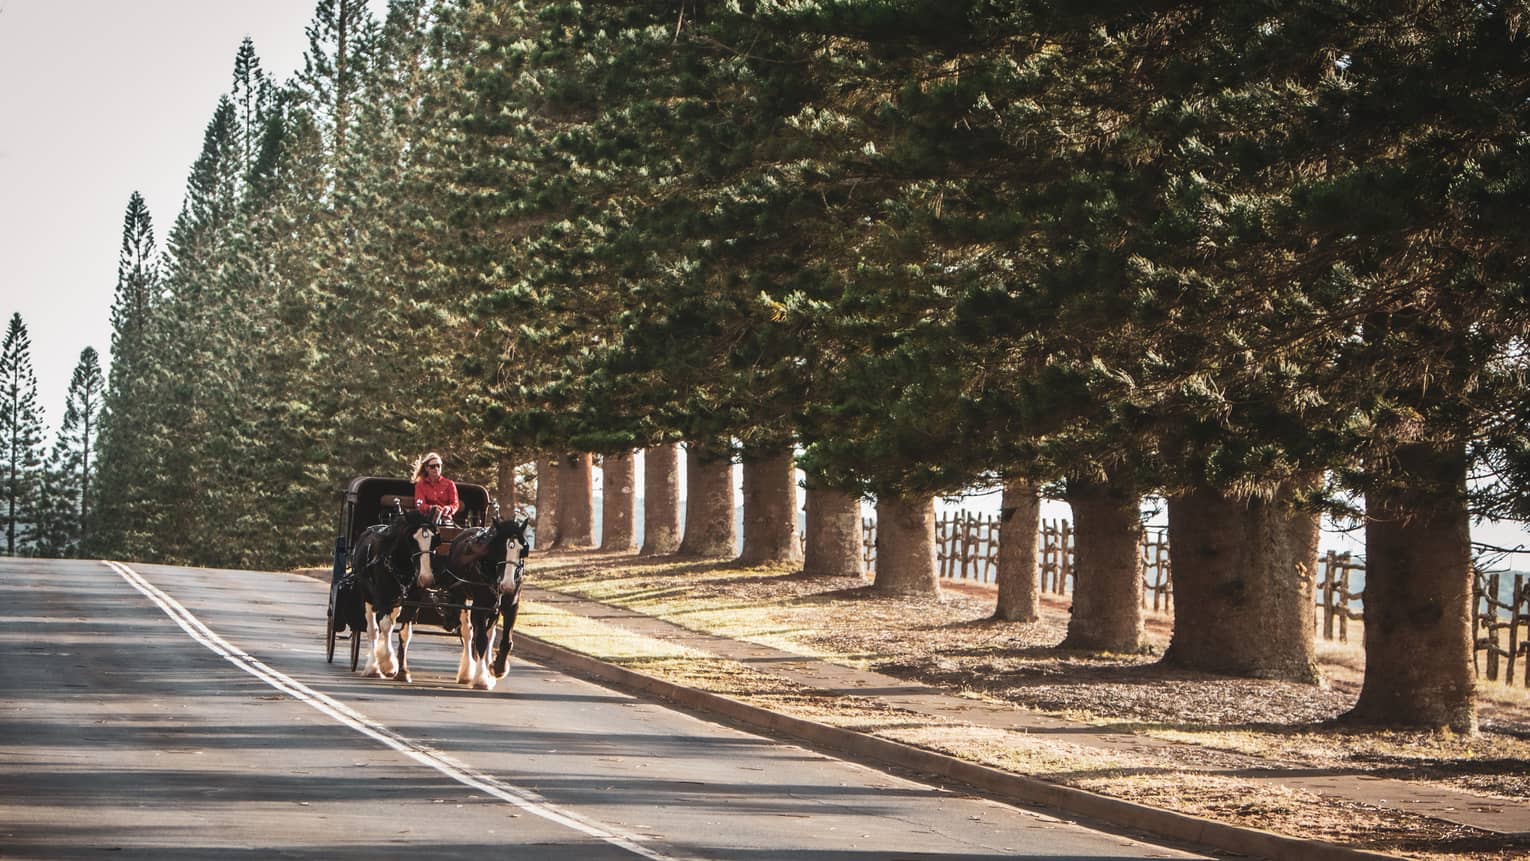 Horse-drawn carriage on a road lined with trees